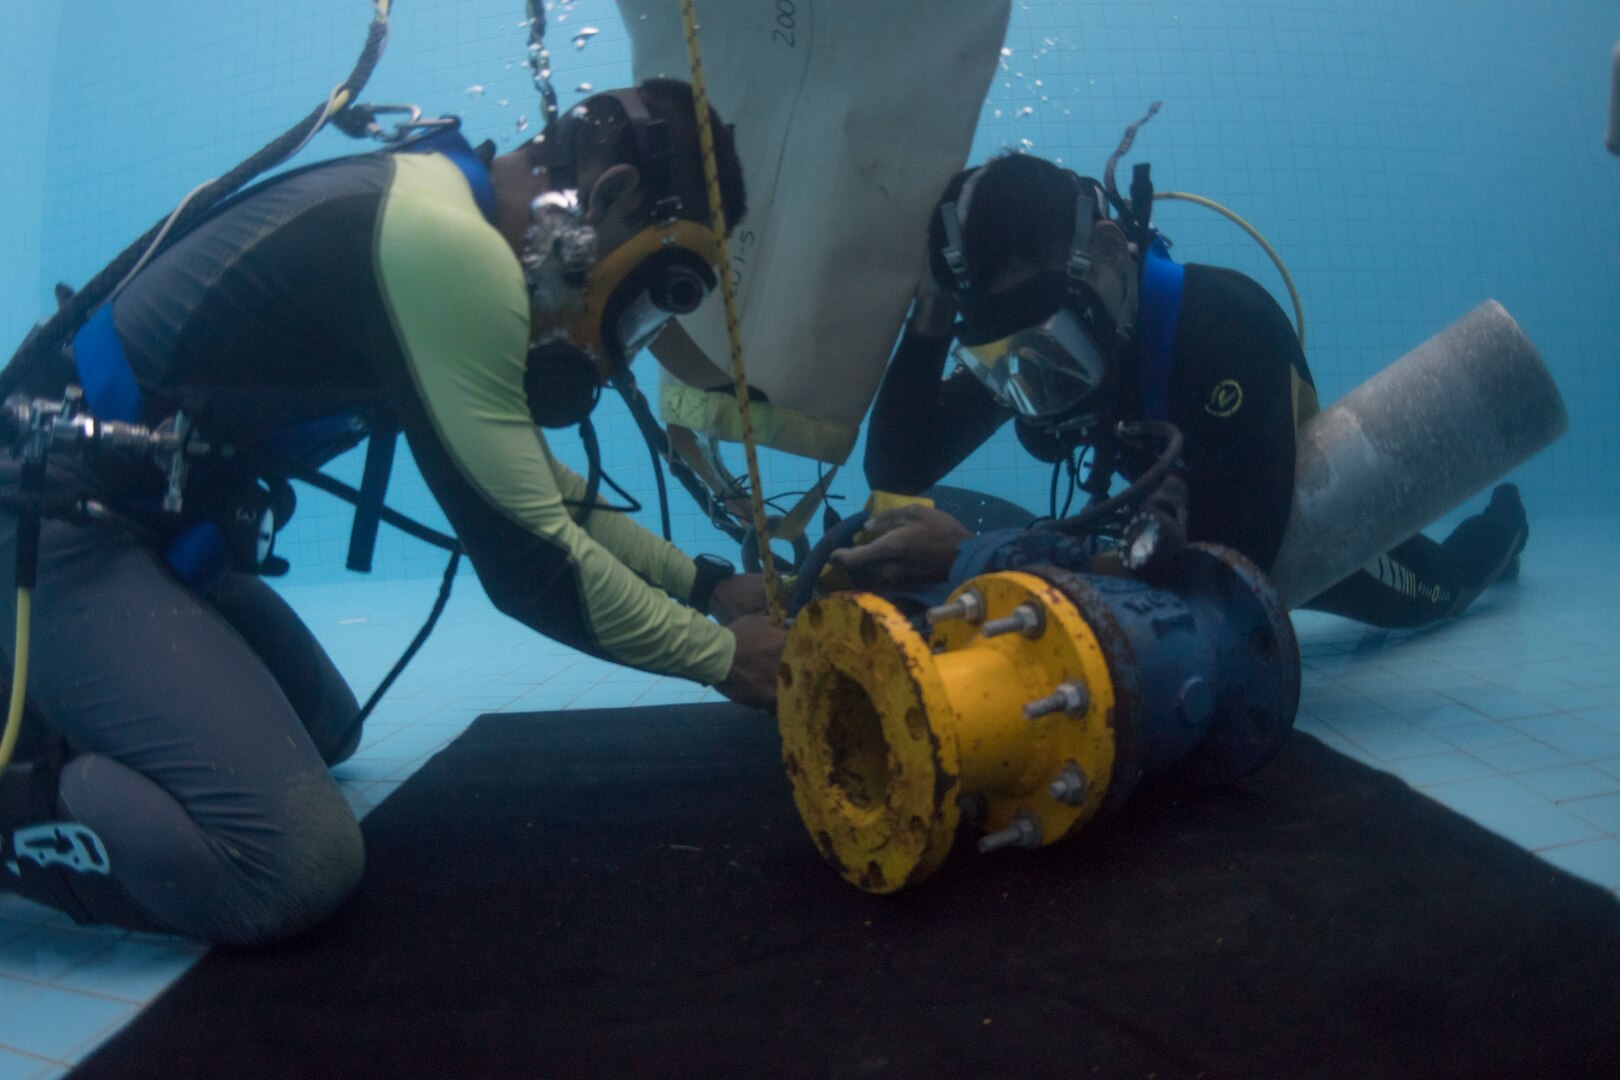 Royal Thai Navy sailors attach a lift bag to a valve flange in the RTN Dive School pool in Sattahip, Thailand during Exercise Cobra Gold Feb. 19, 2018. Cobra Gold 18 provides a venue for the United States, allied and partner nations to advance interoperability and increase partner capacity in planning and executing complex and realistic multinational force and combined task force operations.